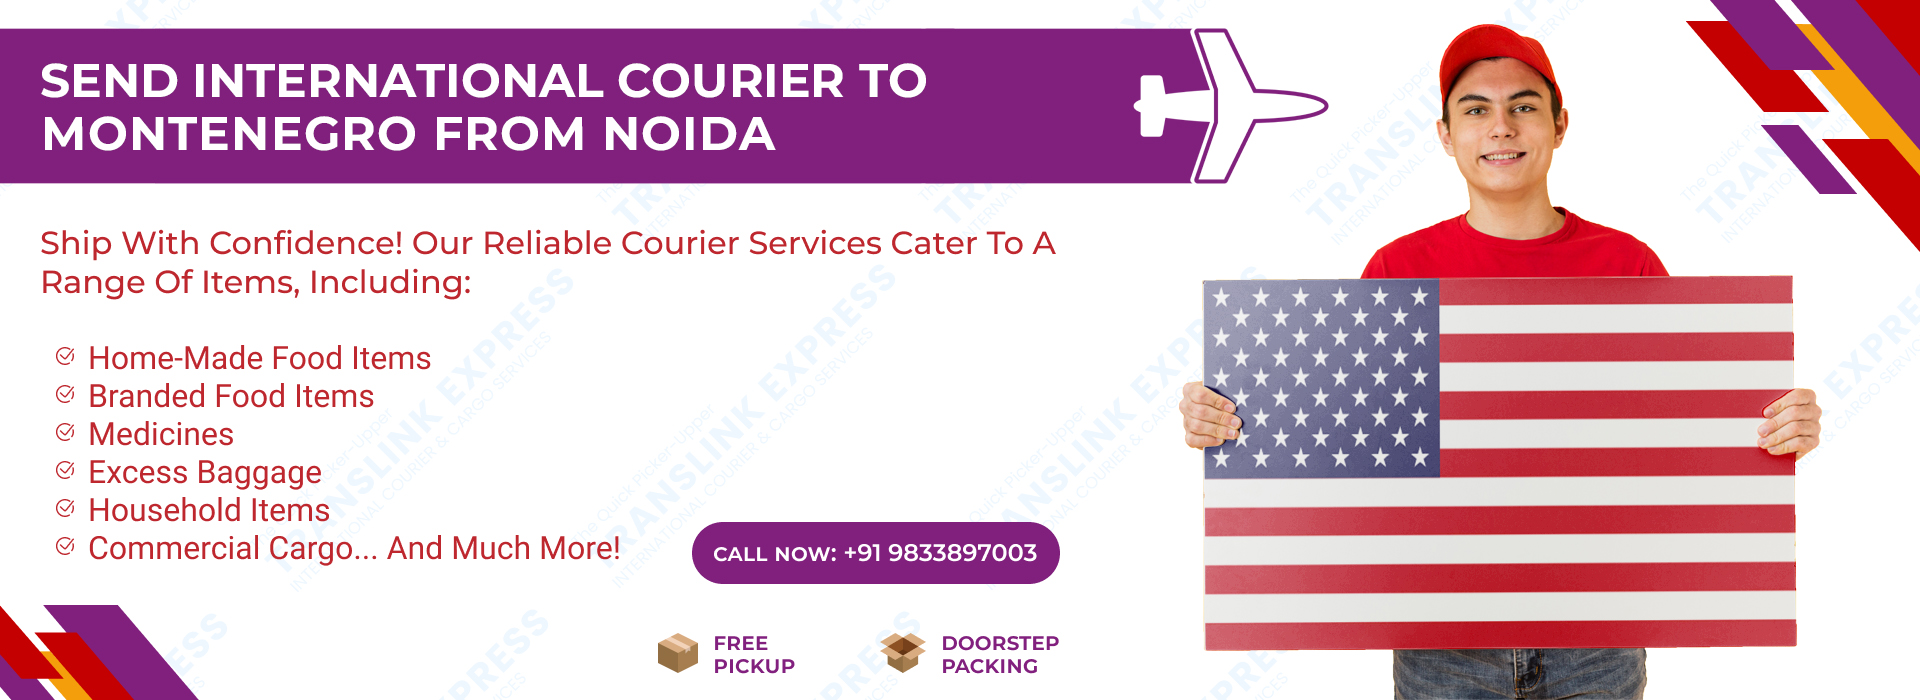 Courier to Montenegro From Noida